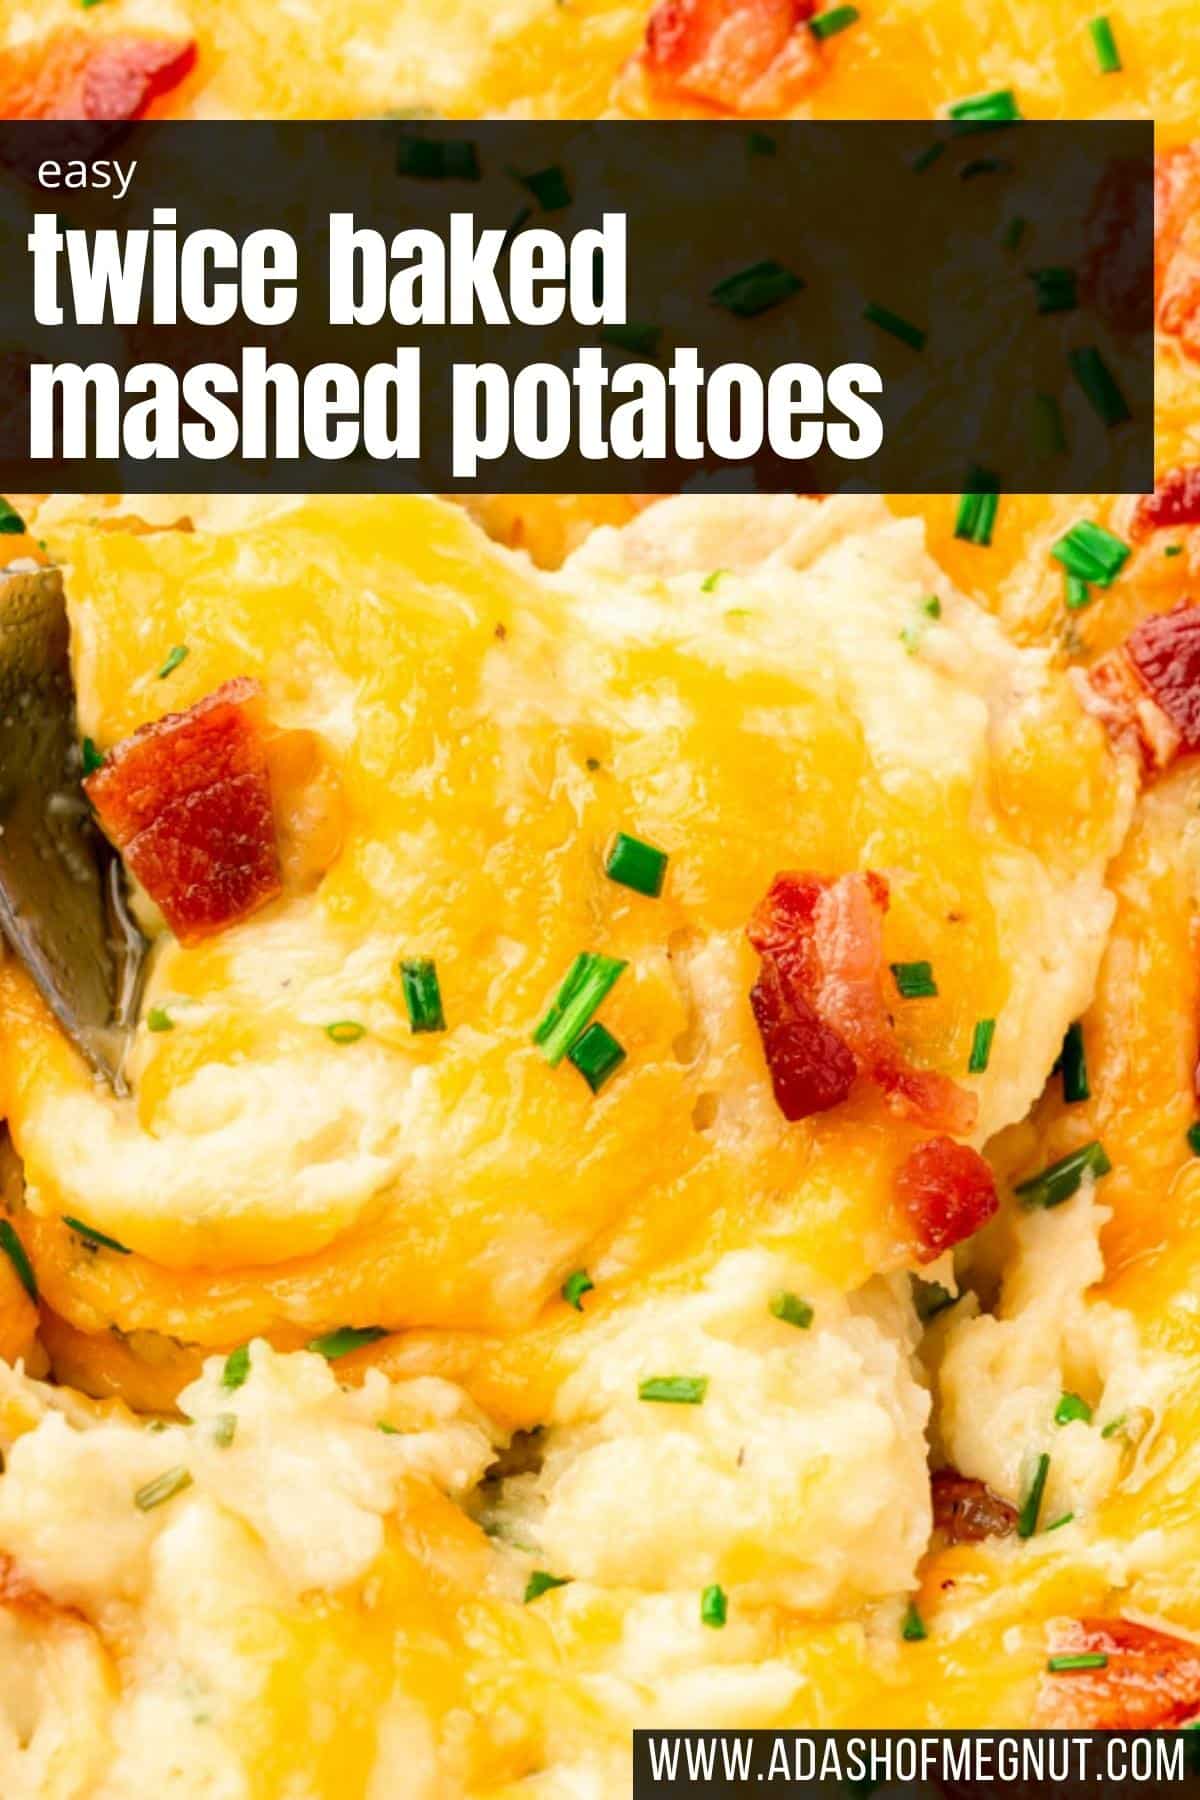 A spoon digging into a casserole dish of mashed potatoes topped with bacon and cheddar cheese.